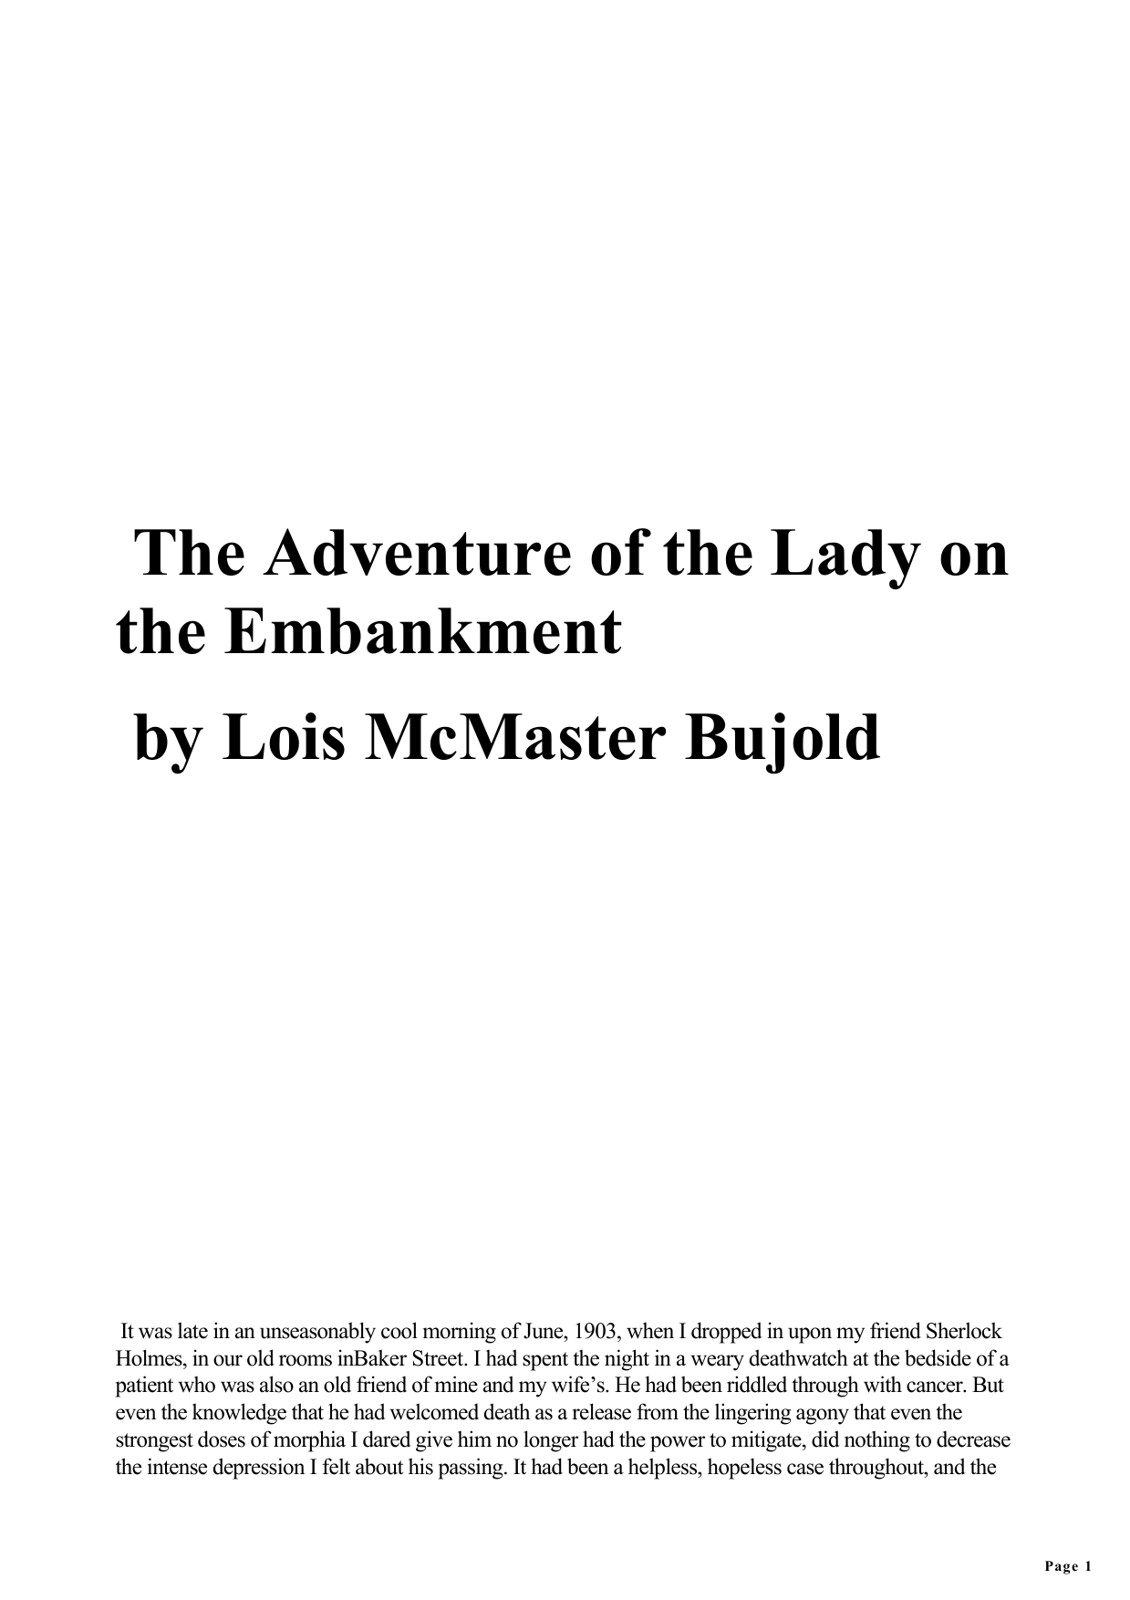 The Adventure of the Lady on the Embankment